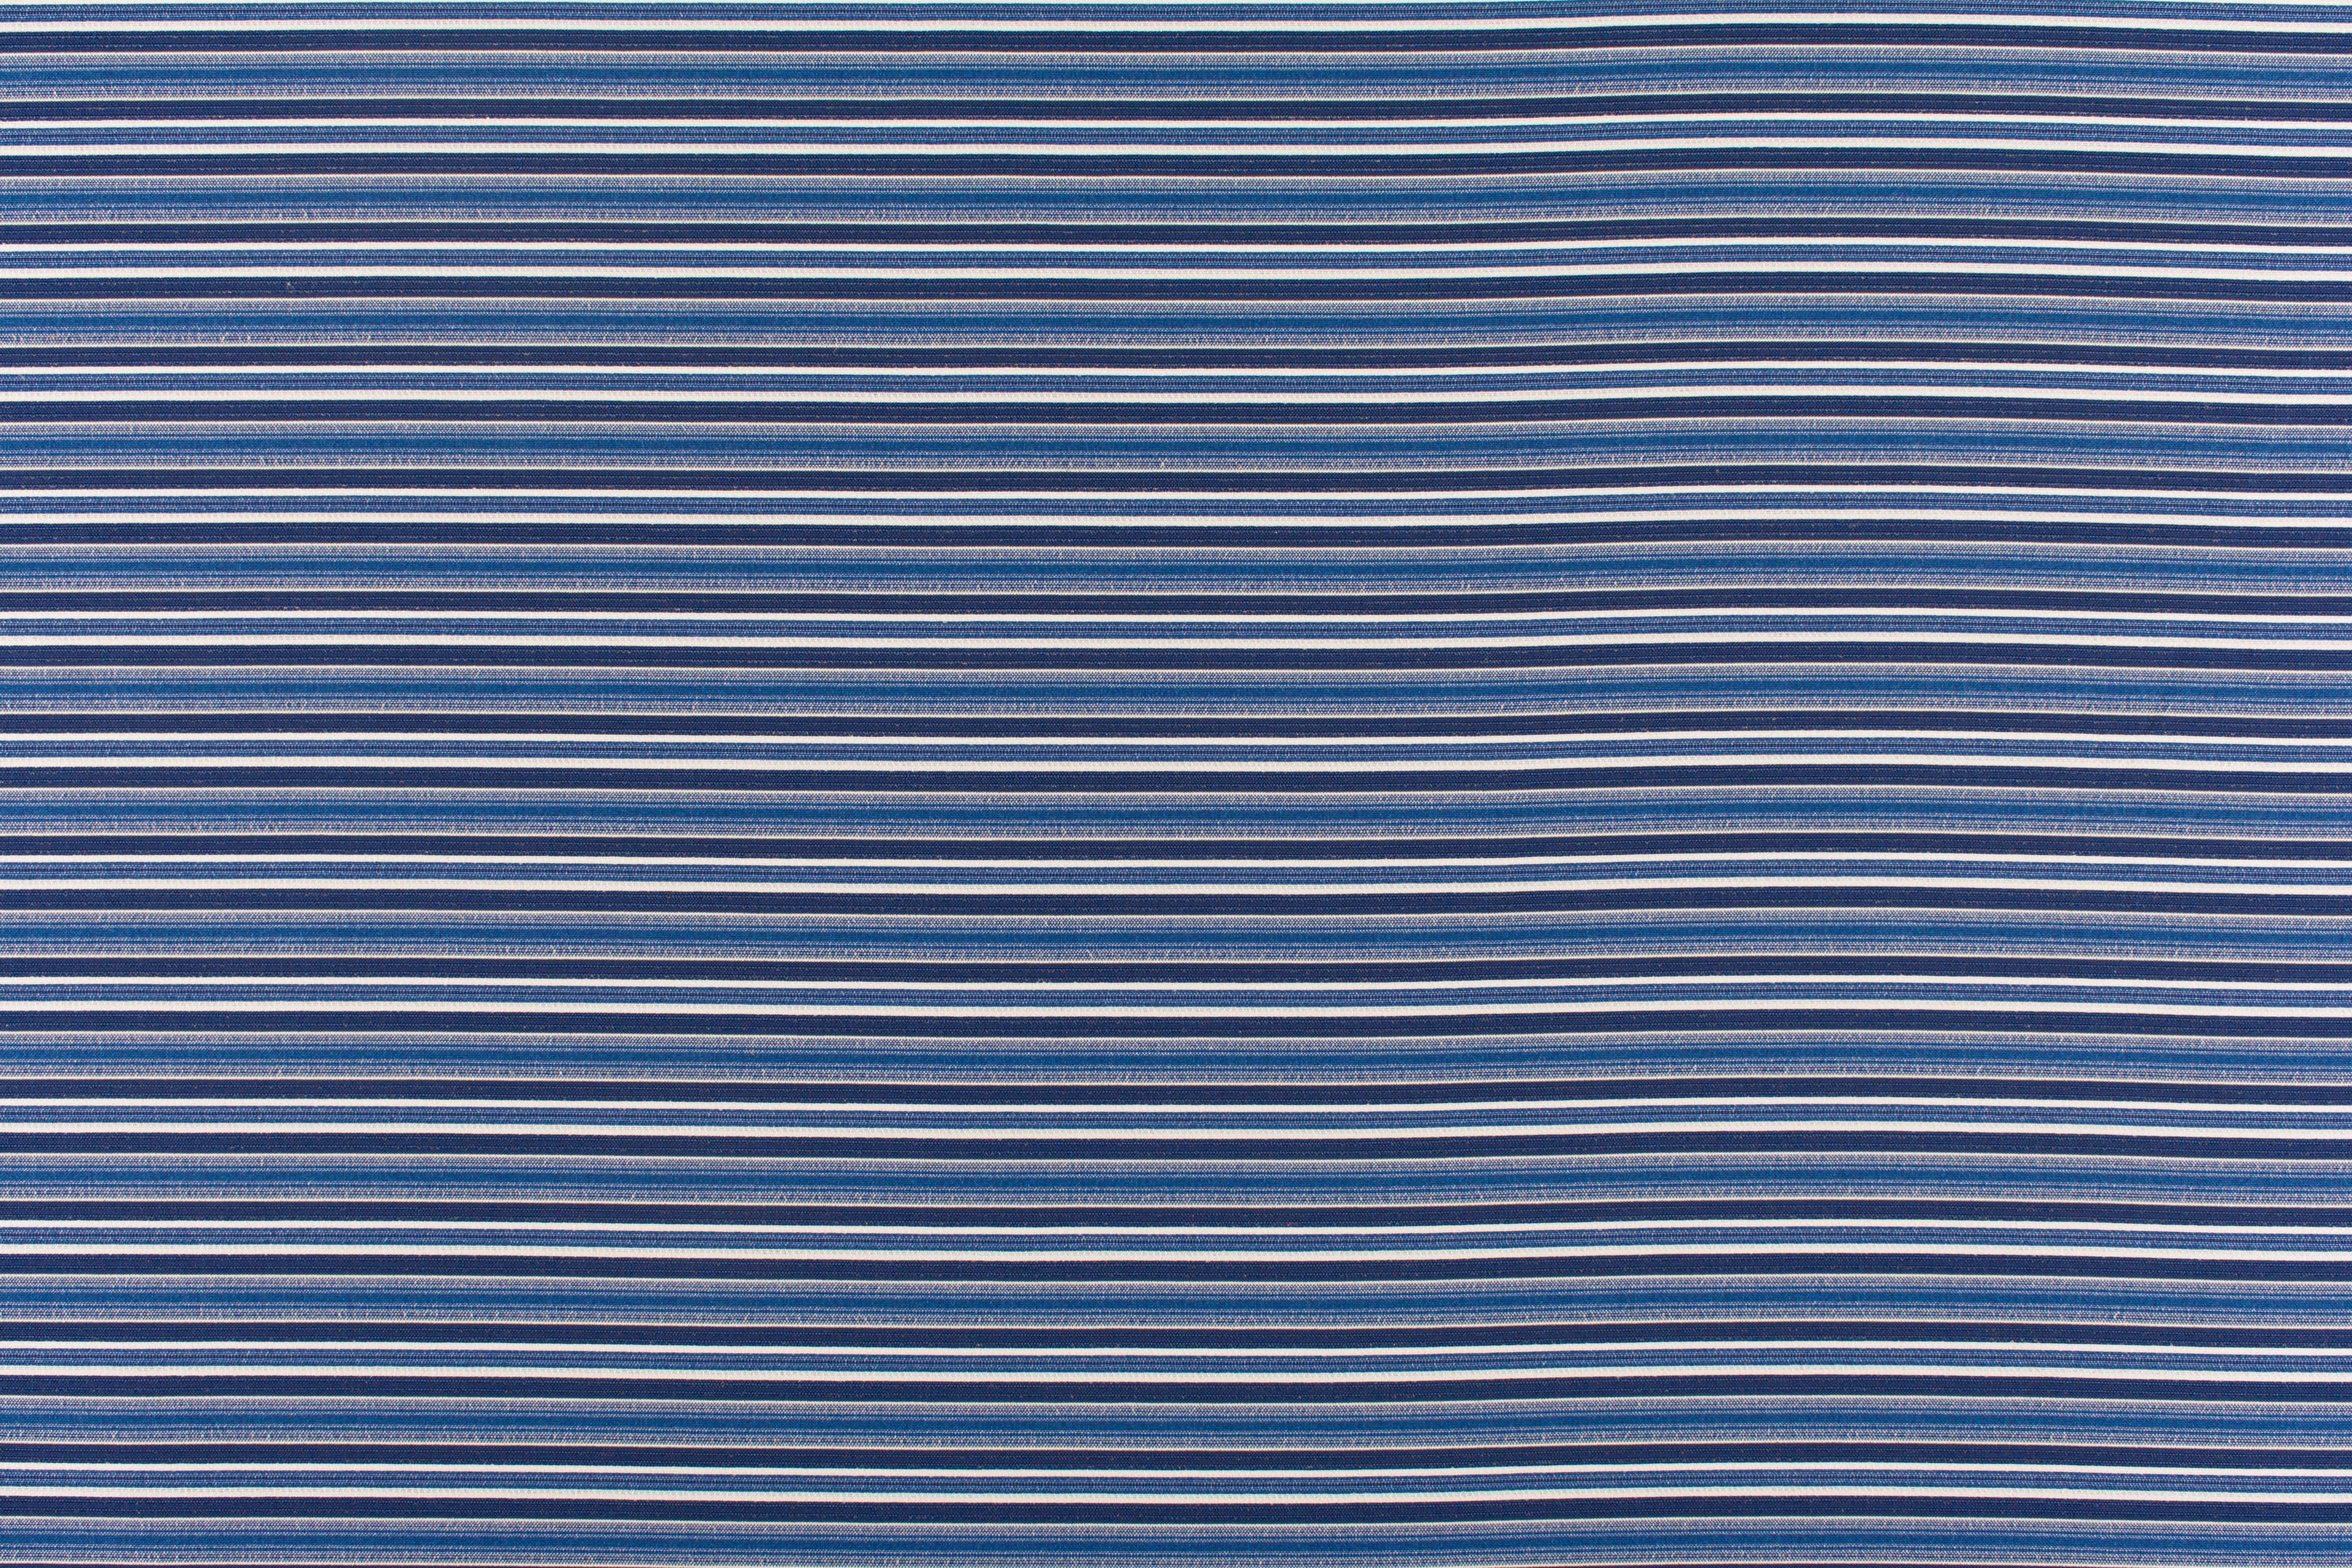 Steps Beach fabric in indigo color - pattern number WR 00012661 - by Scalamandre in the Old World Weavers collection